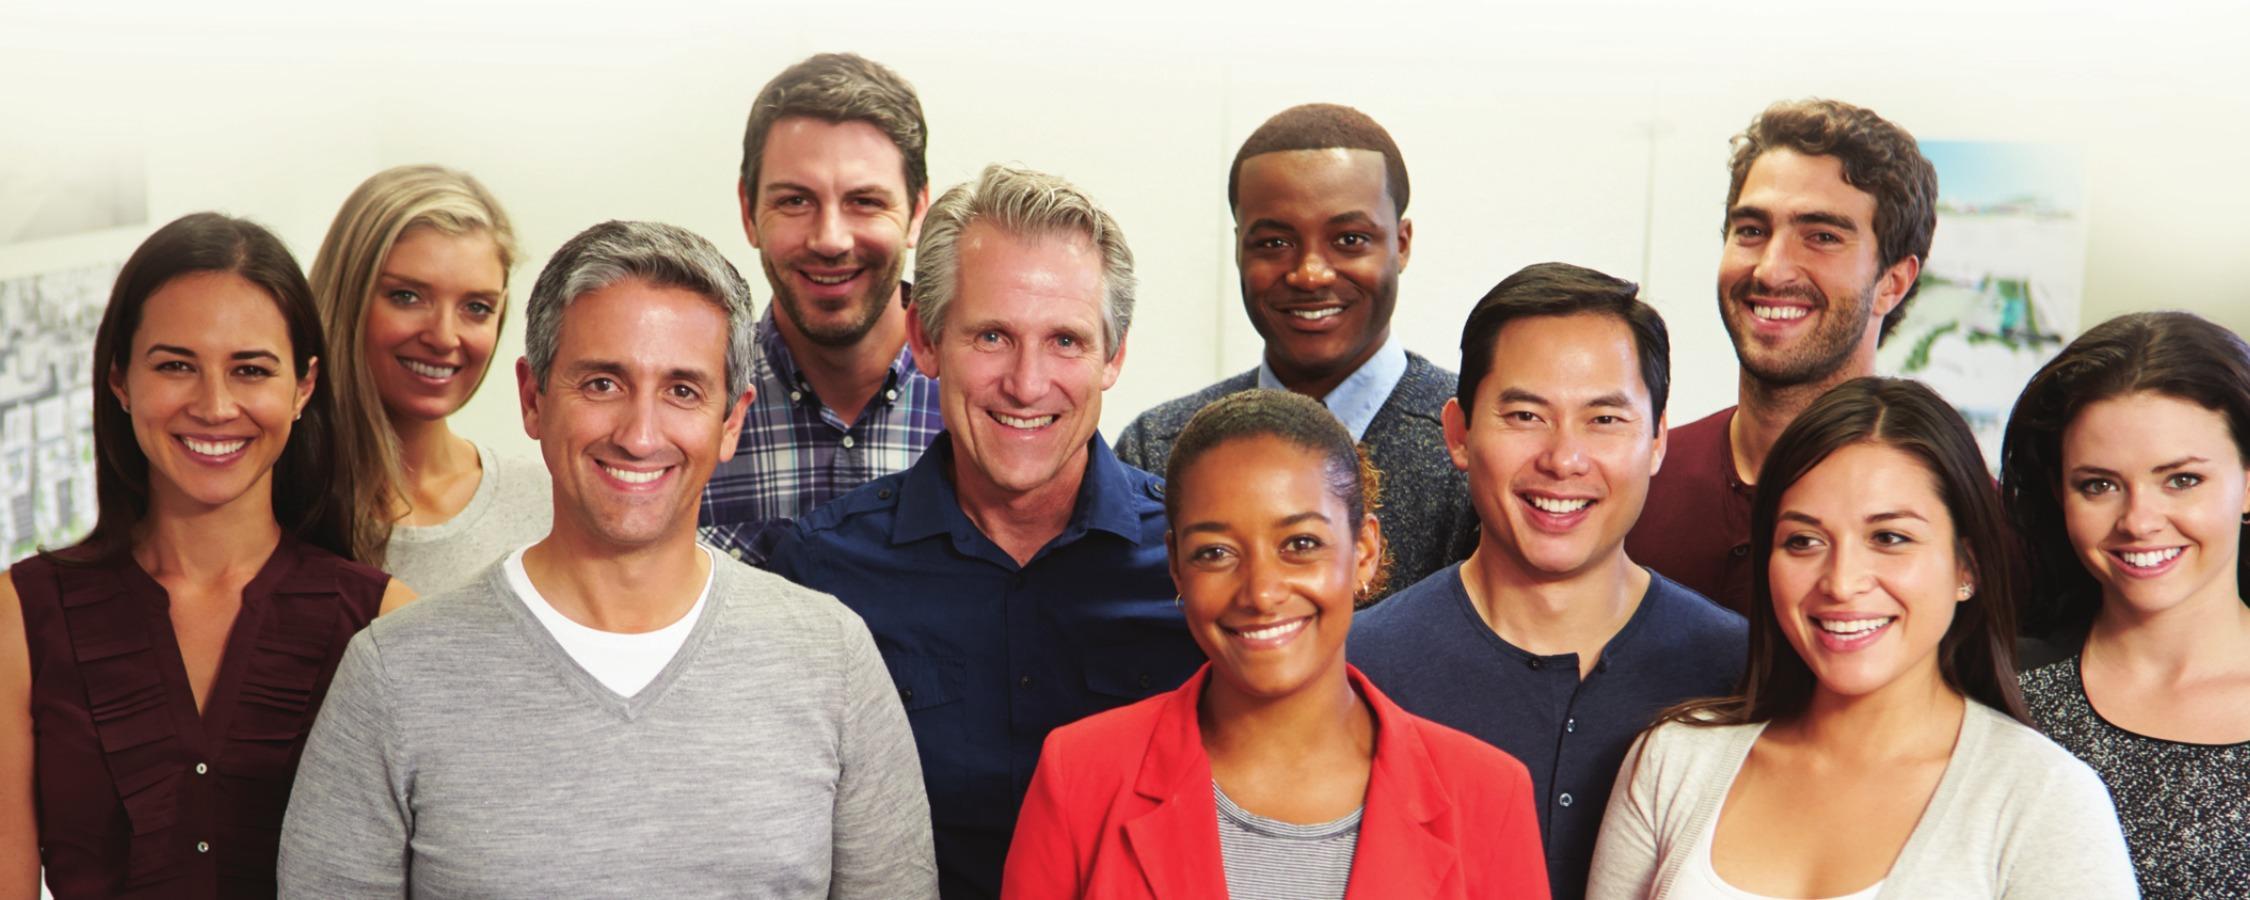 Group of Diverse Adults Smiling at Camera